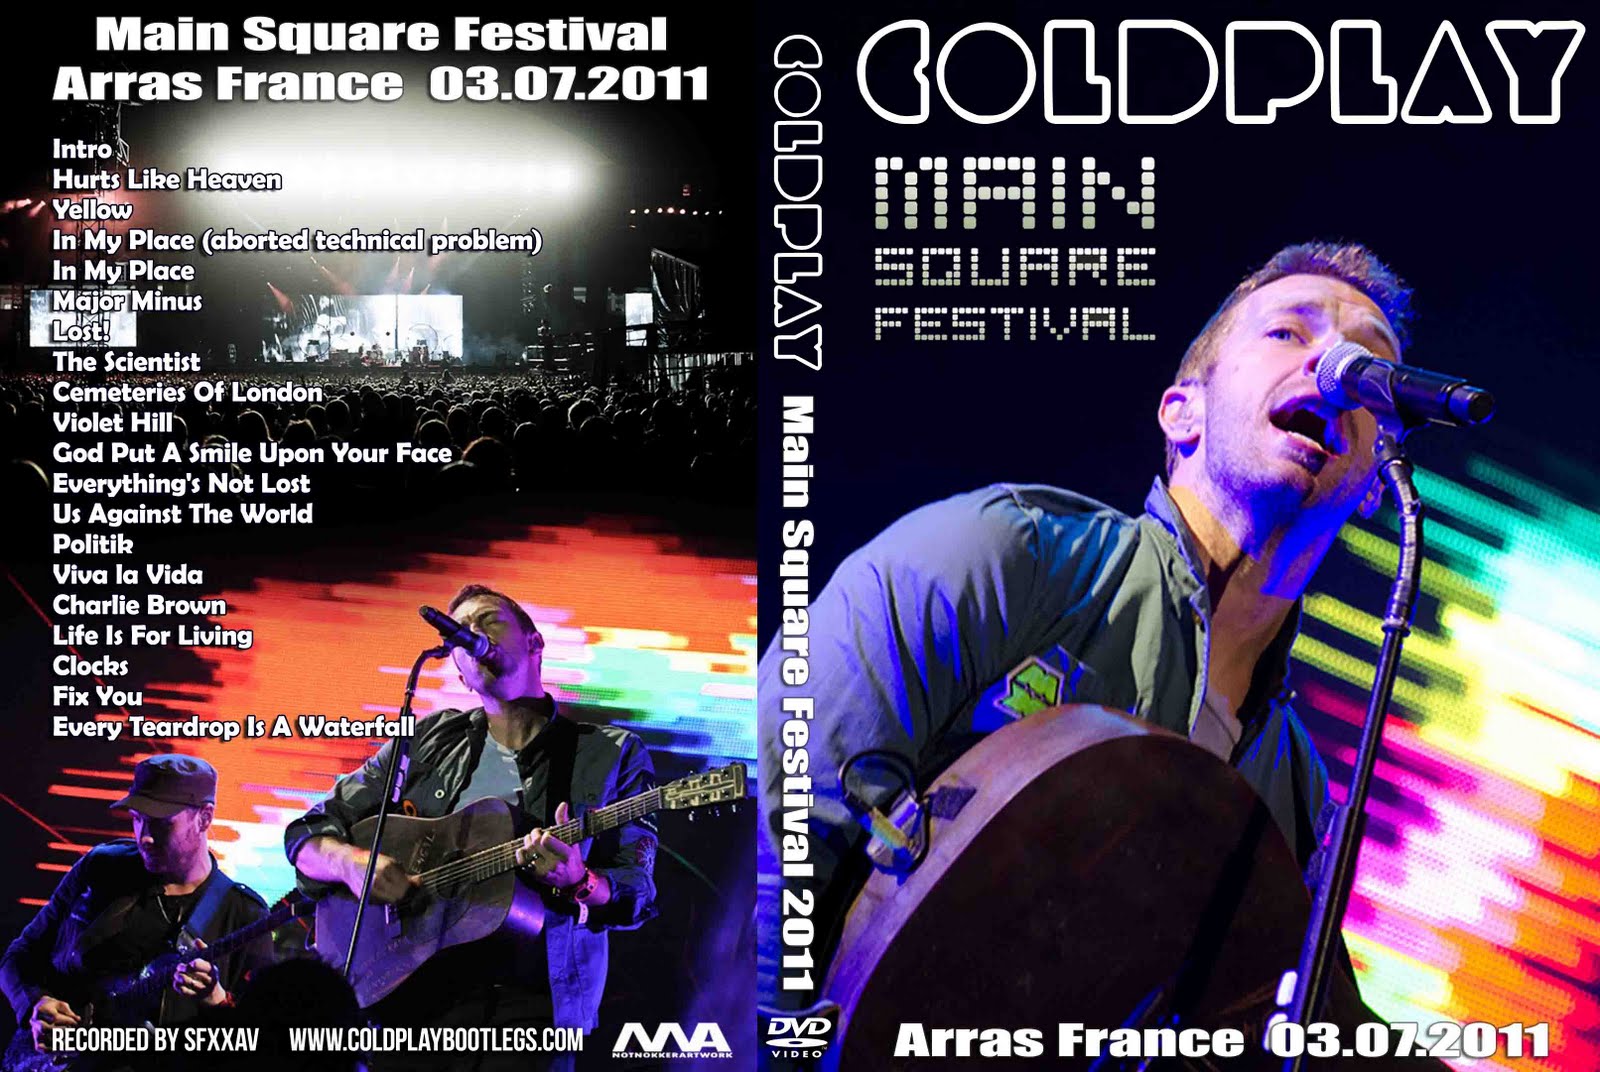 DVD Concert TH Power By Deer 5001: Coldplay - 2011-07-03 - Main Square ...